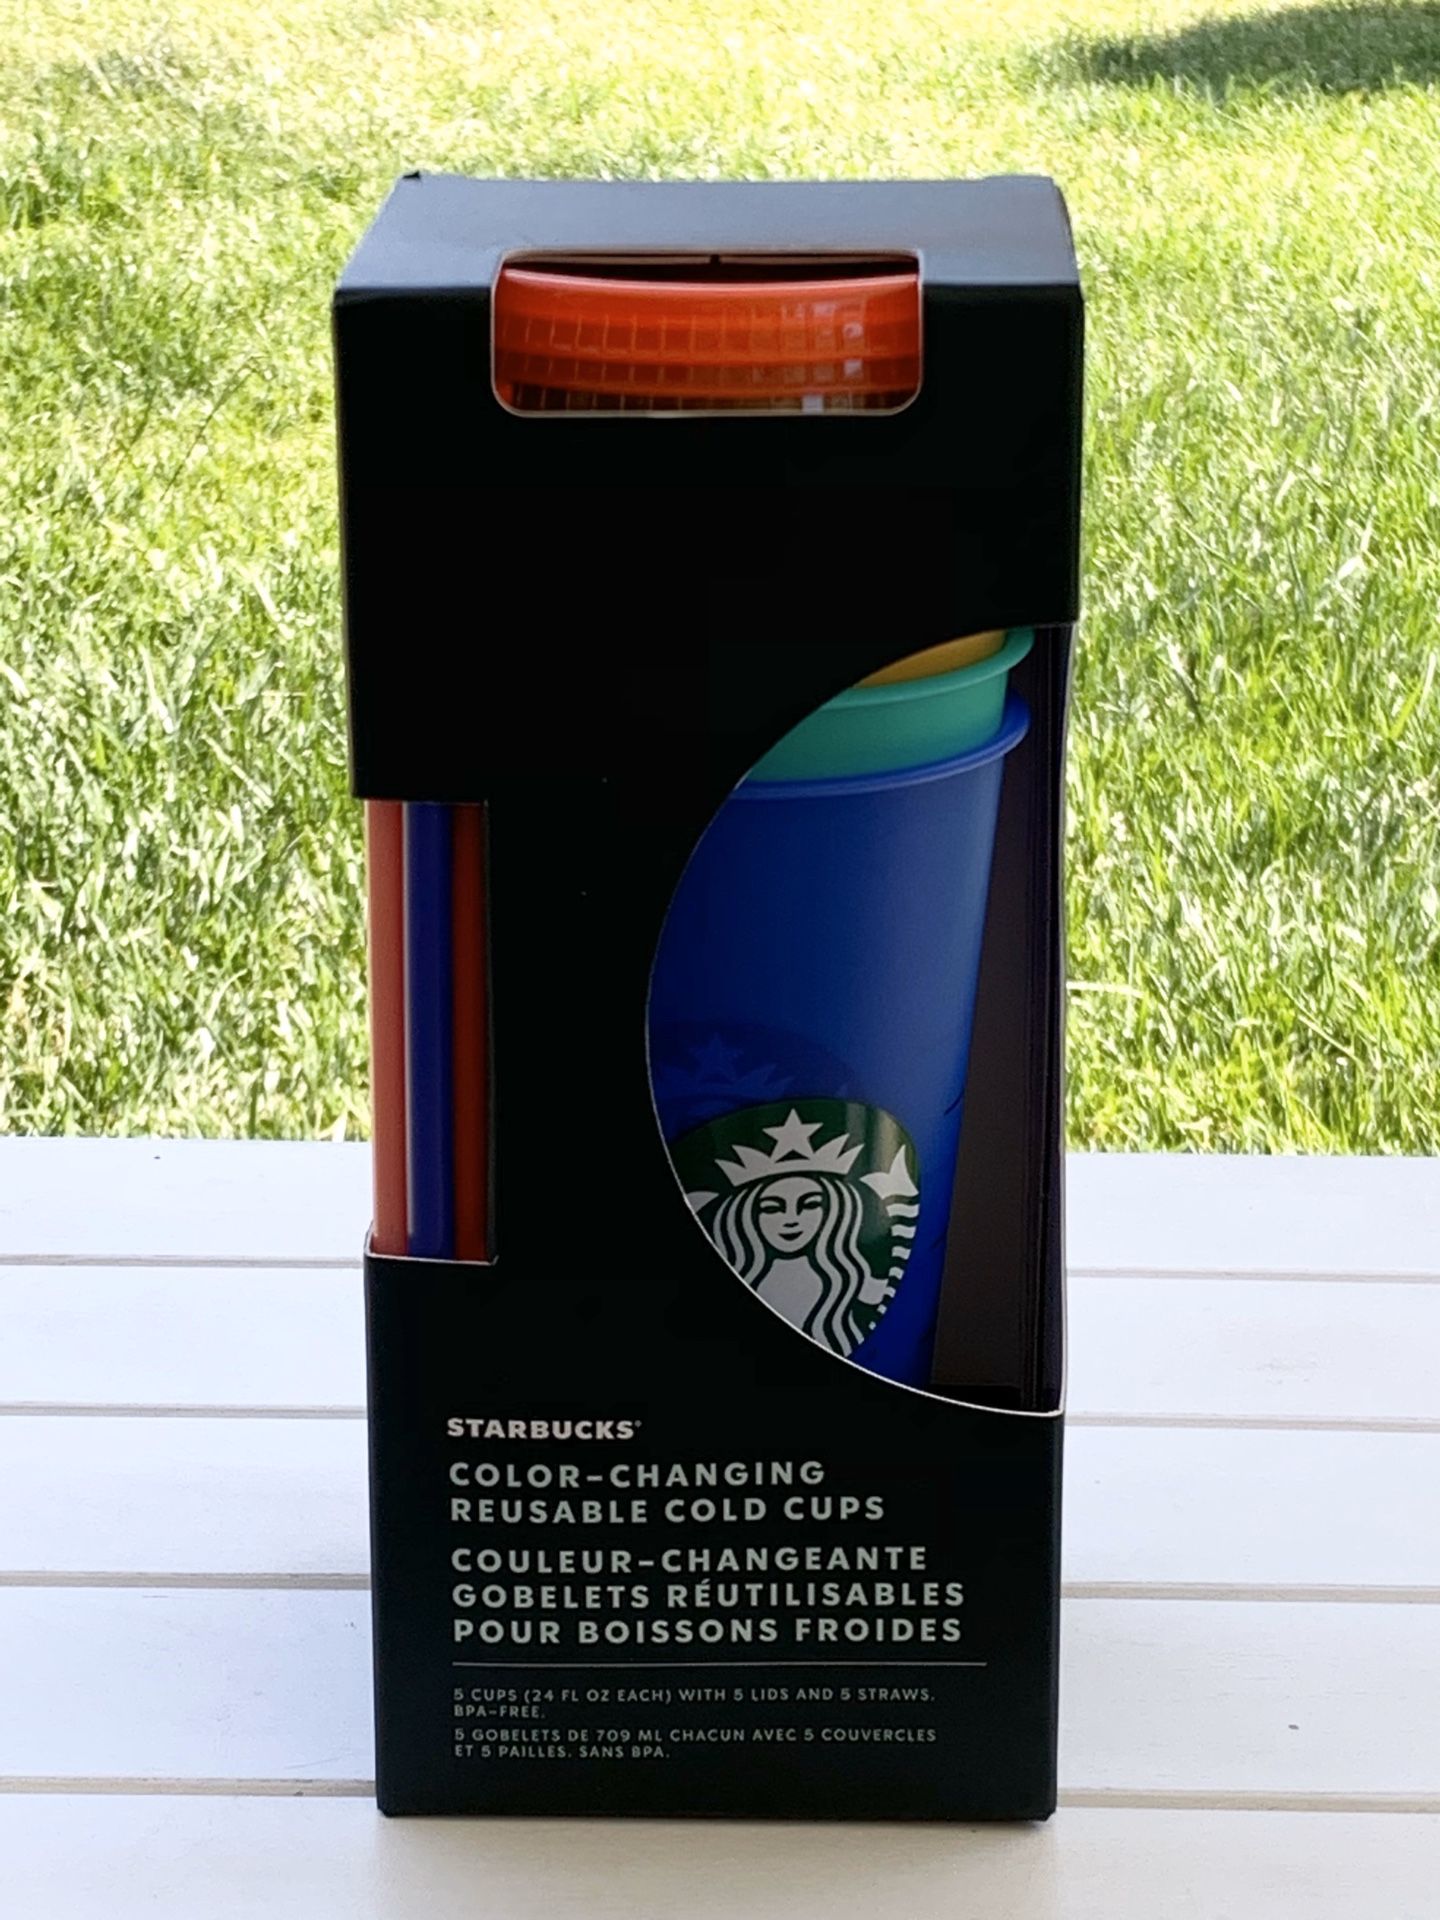 Starbucks Color Changing Cups pack. 5 cups in the pack.